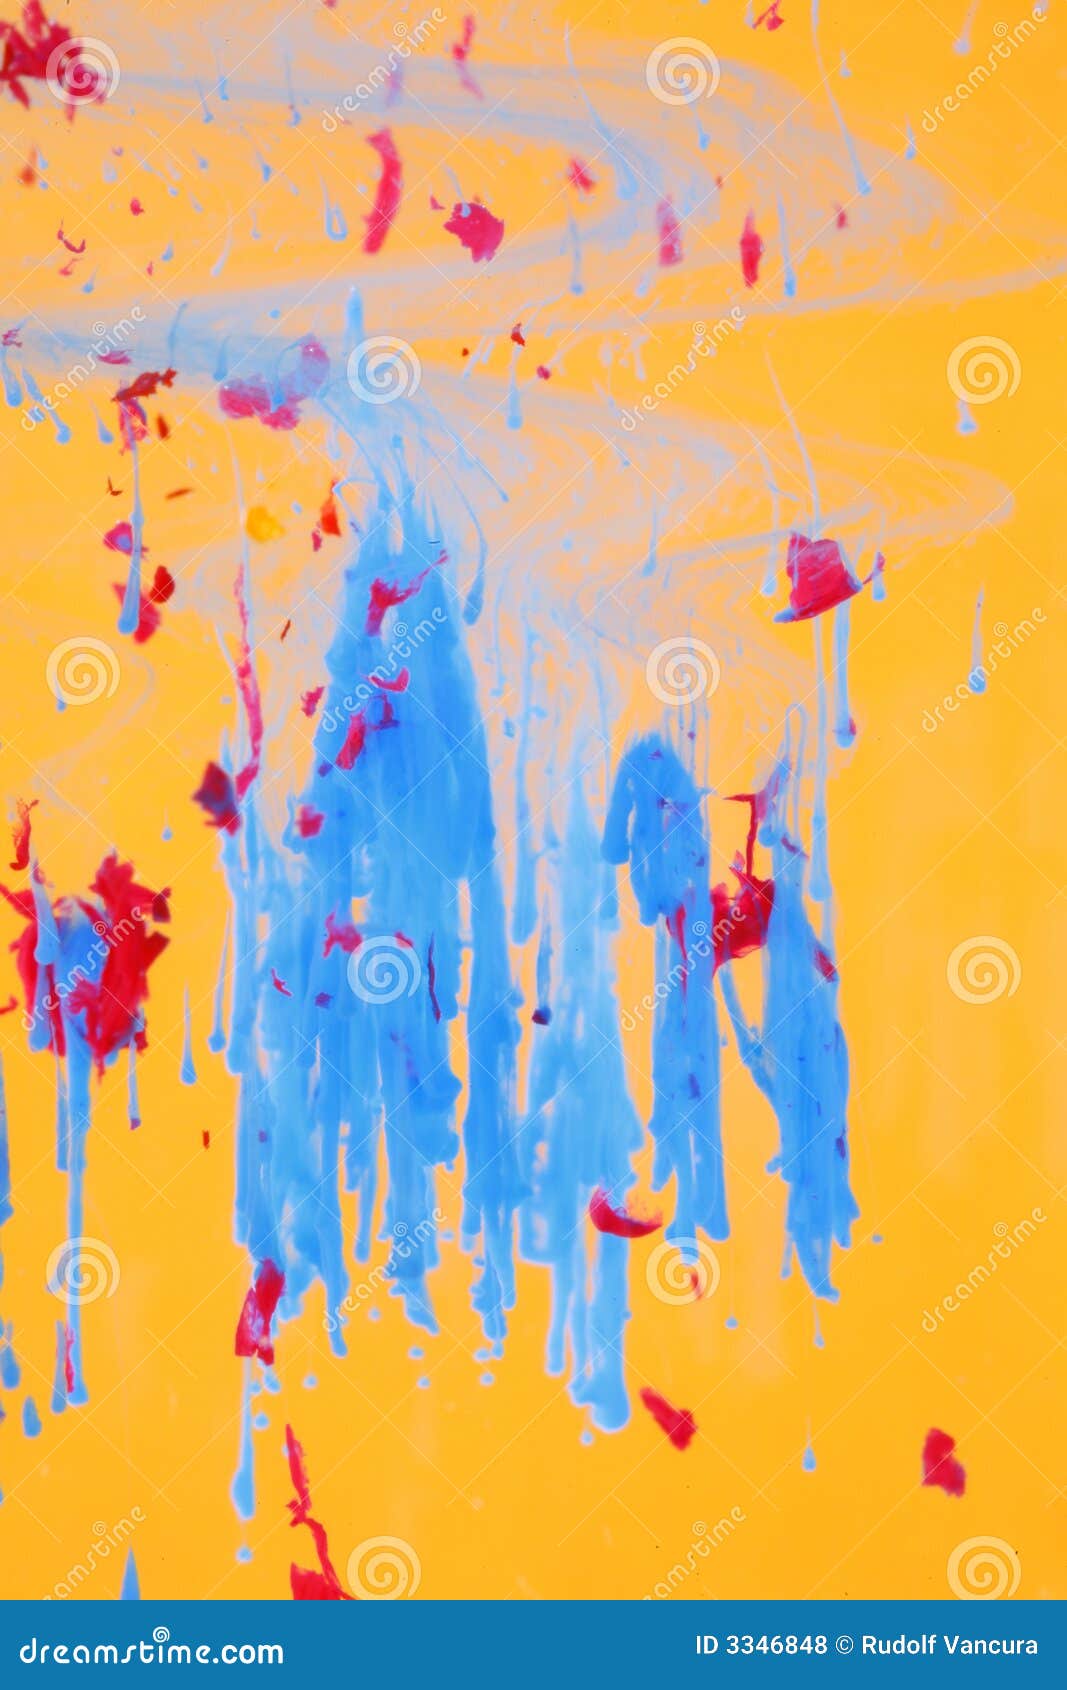 A view of abstract liquid art suitable for a background, with blue and red ink dissolving and sinking to the bottom of a glass container in a clear liquid against an yellow background.